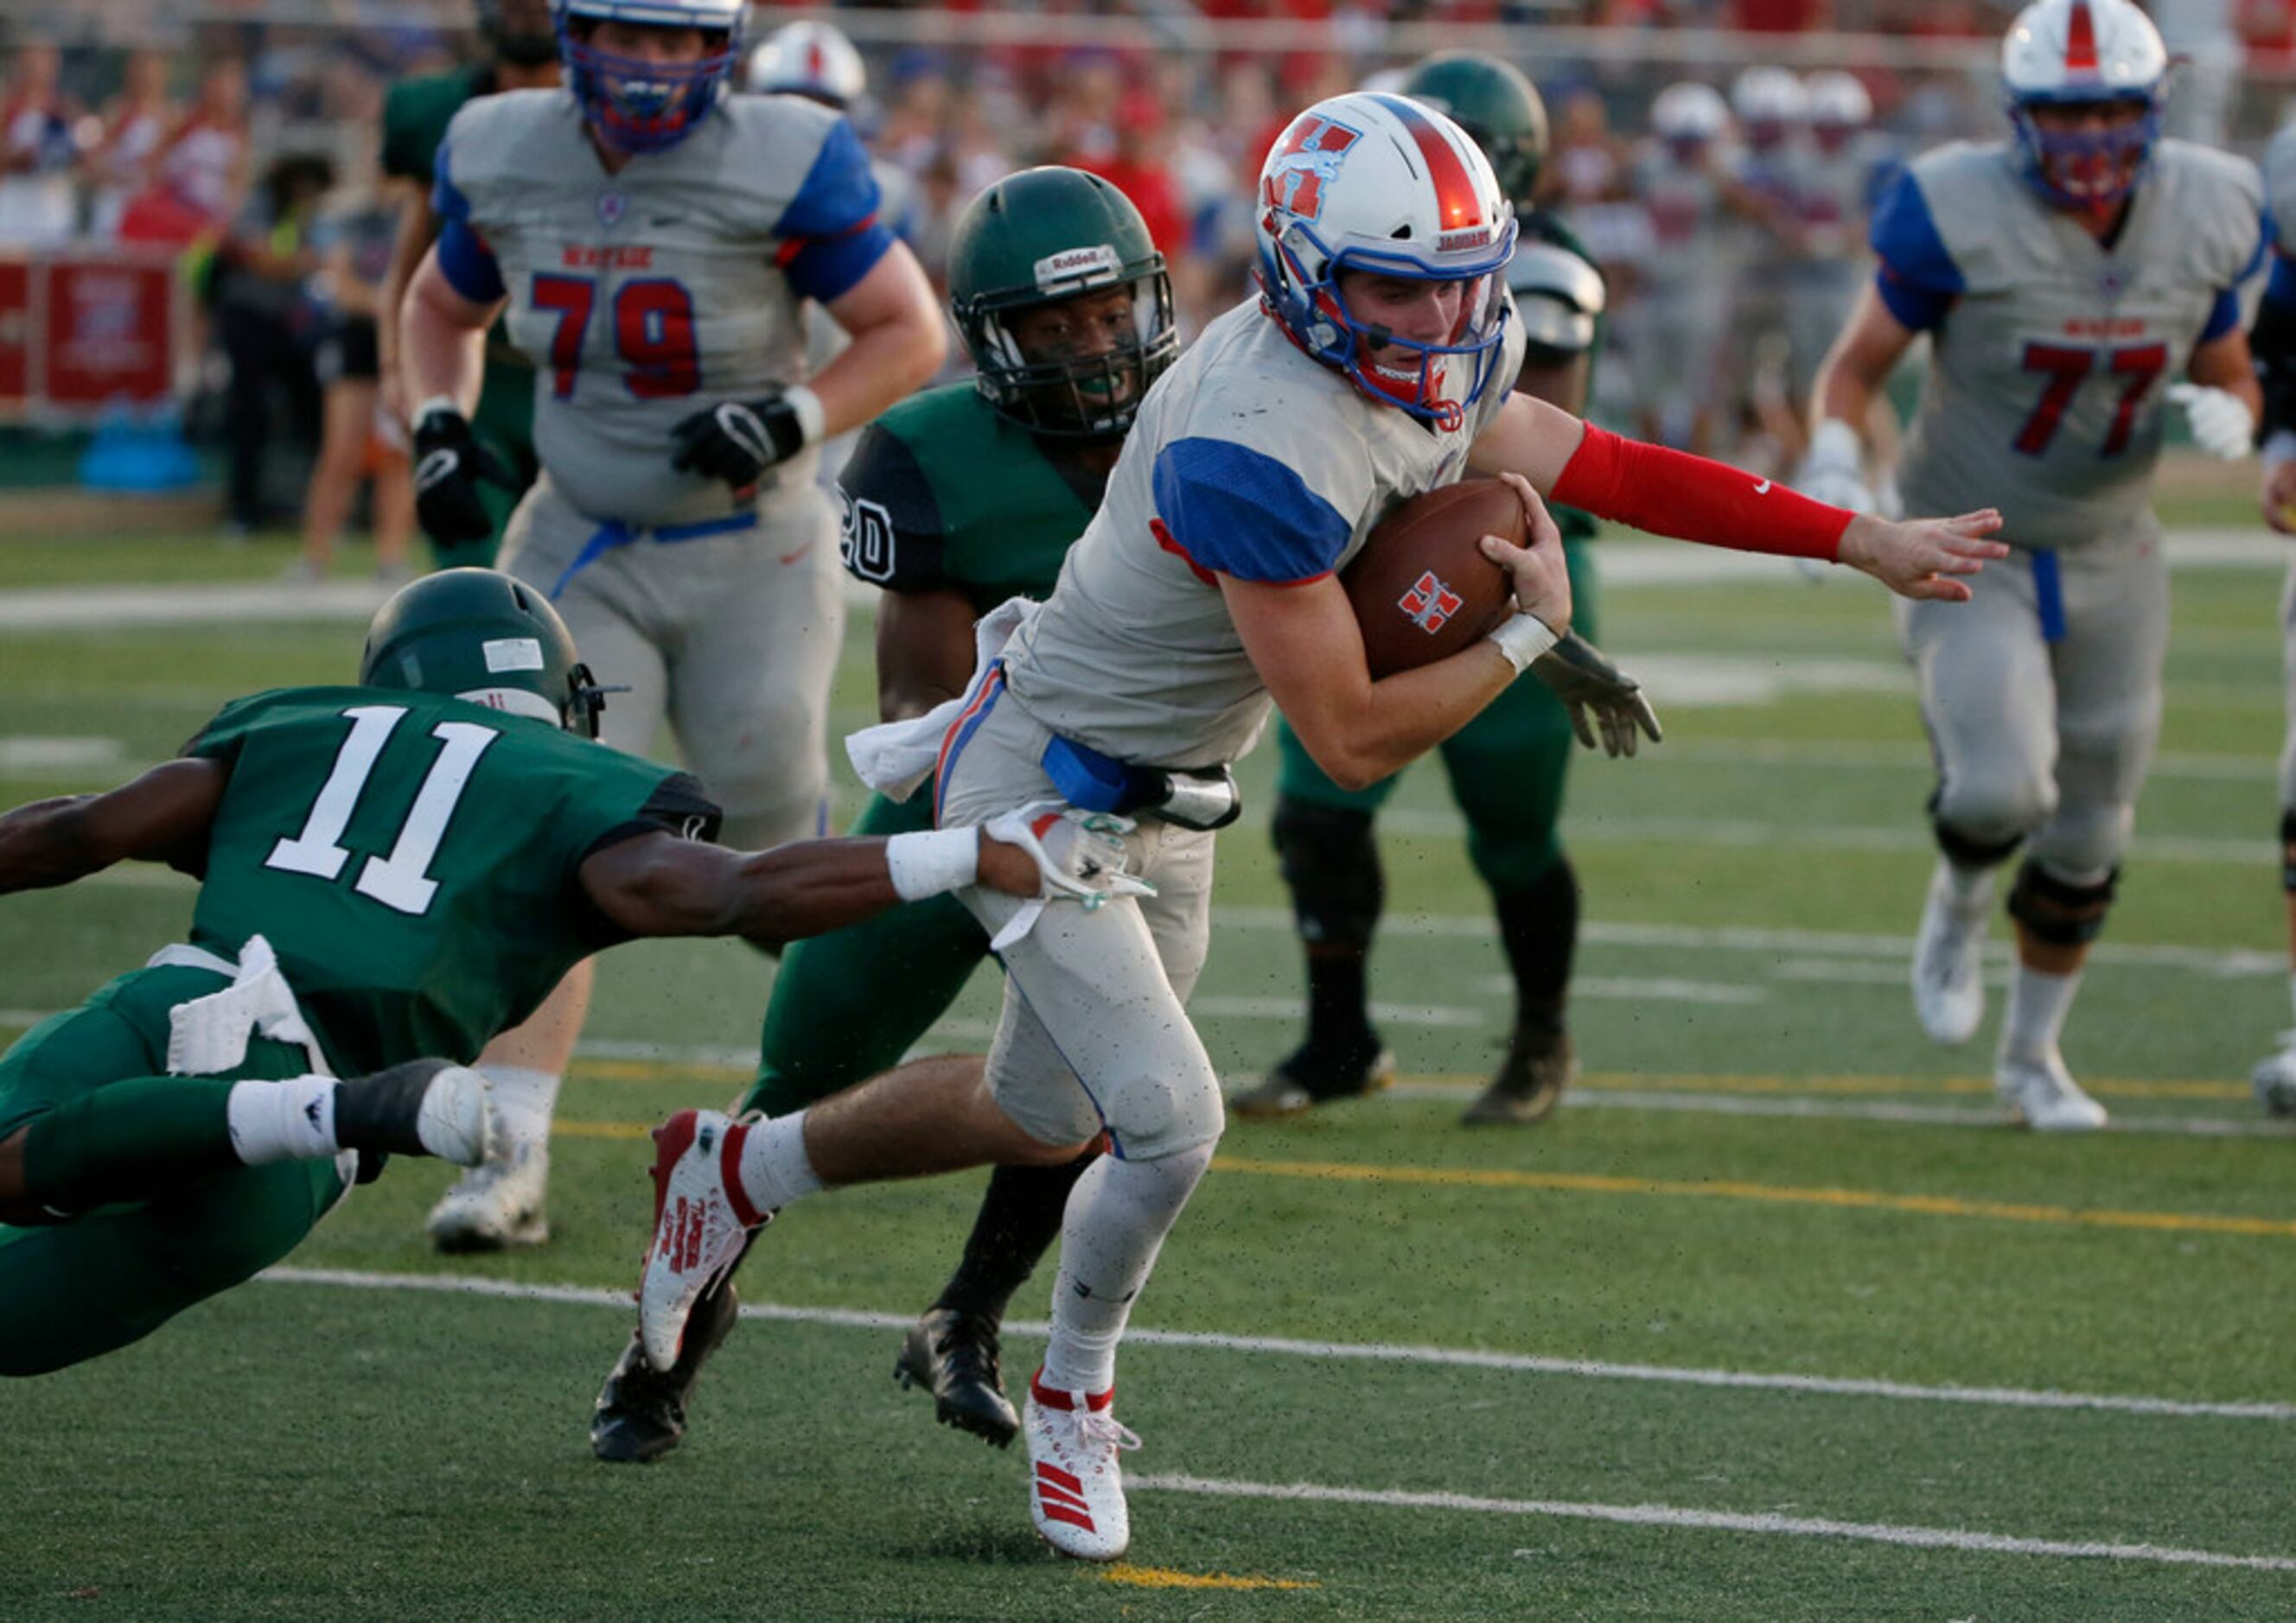 Midlothian Heritage quarterback Cade Sumbler (6) is tackled by Kennedale's Keirahyin Brown...